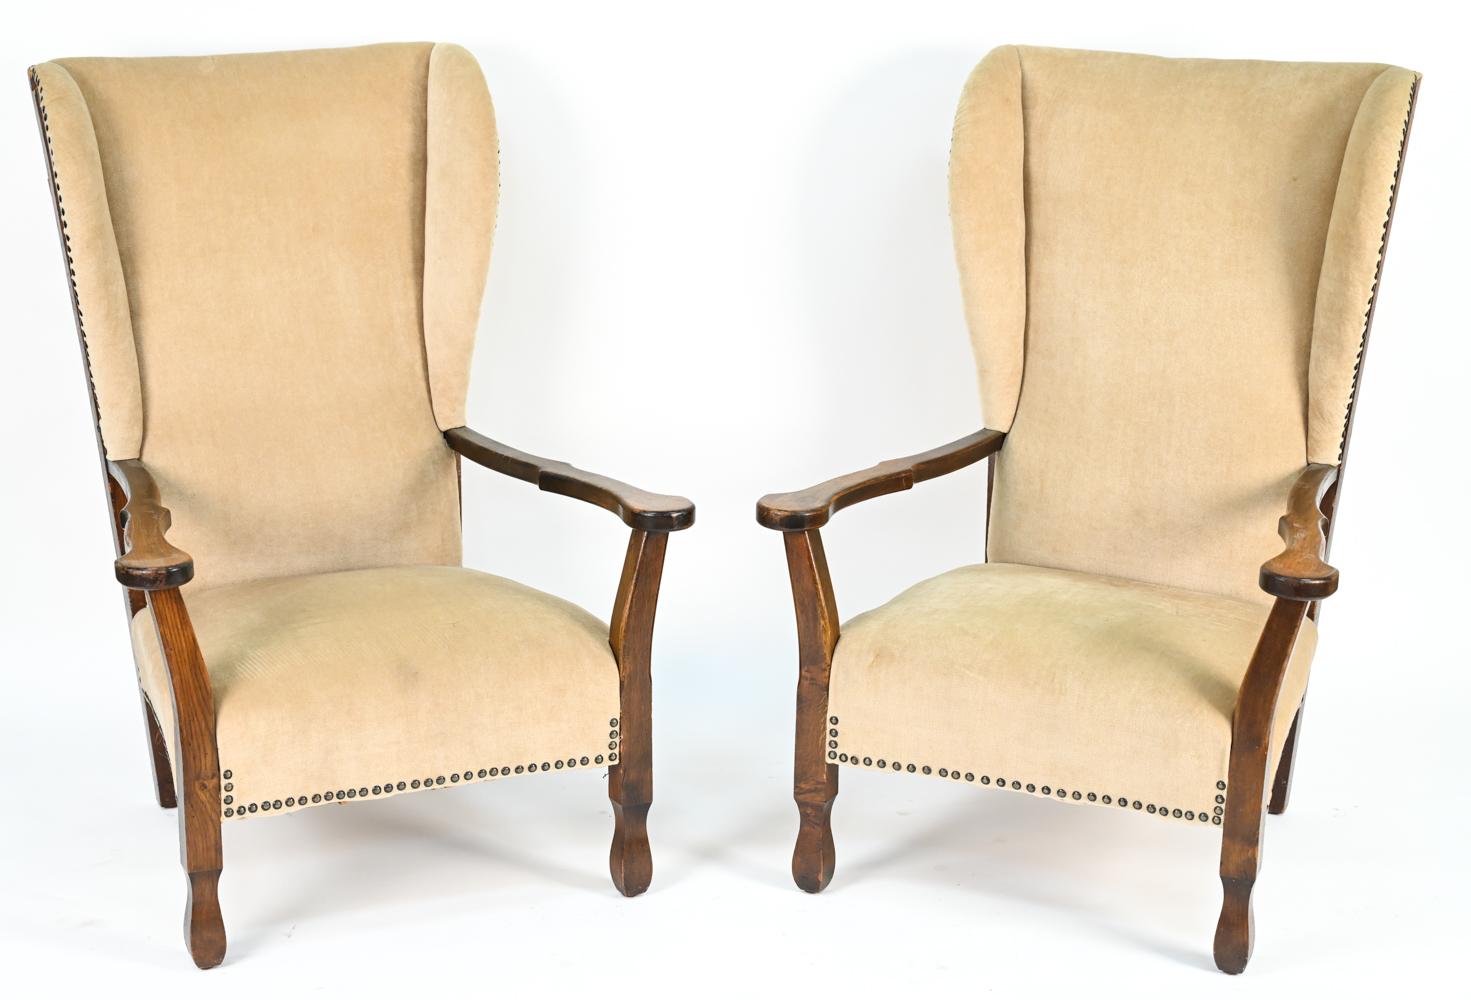 A handsome pair of 1940's highback lounge chairs with oak frames and tacked upholstery. Style of Frits Henningsen and from the Fritz Hansen era. 